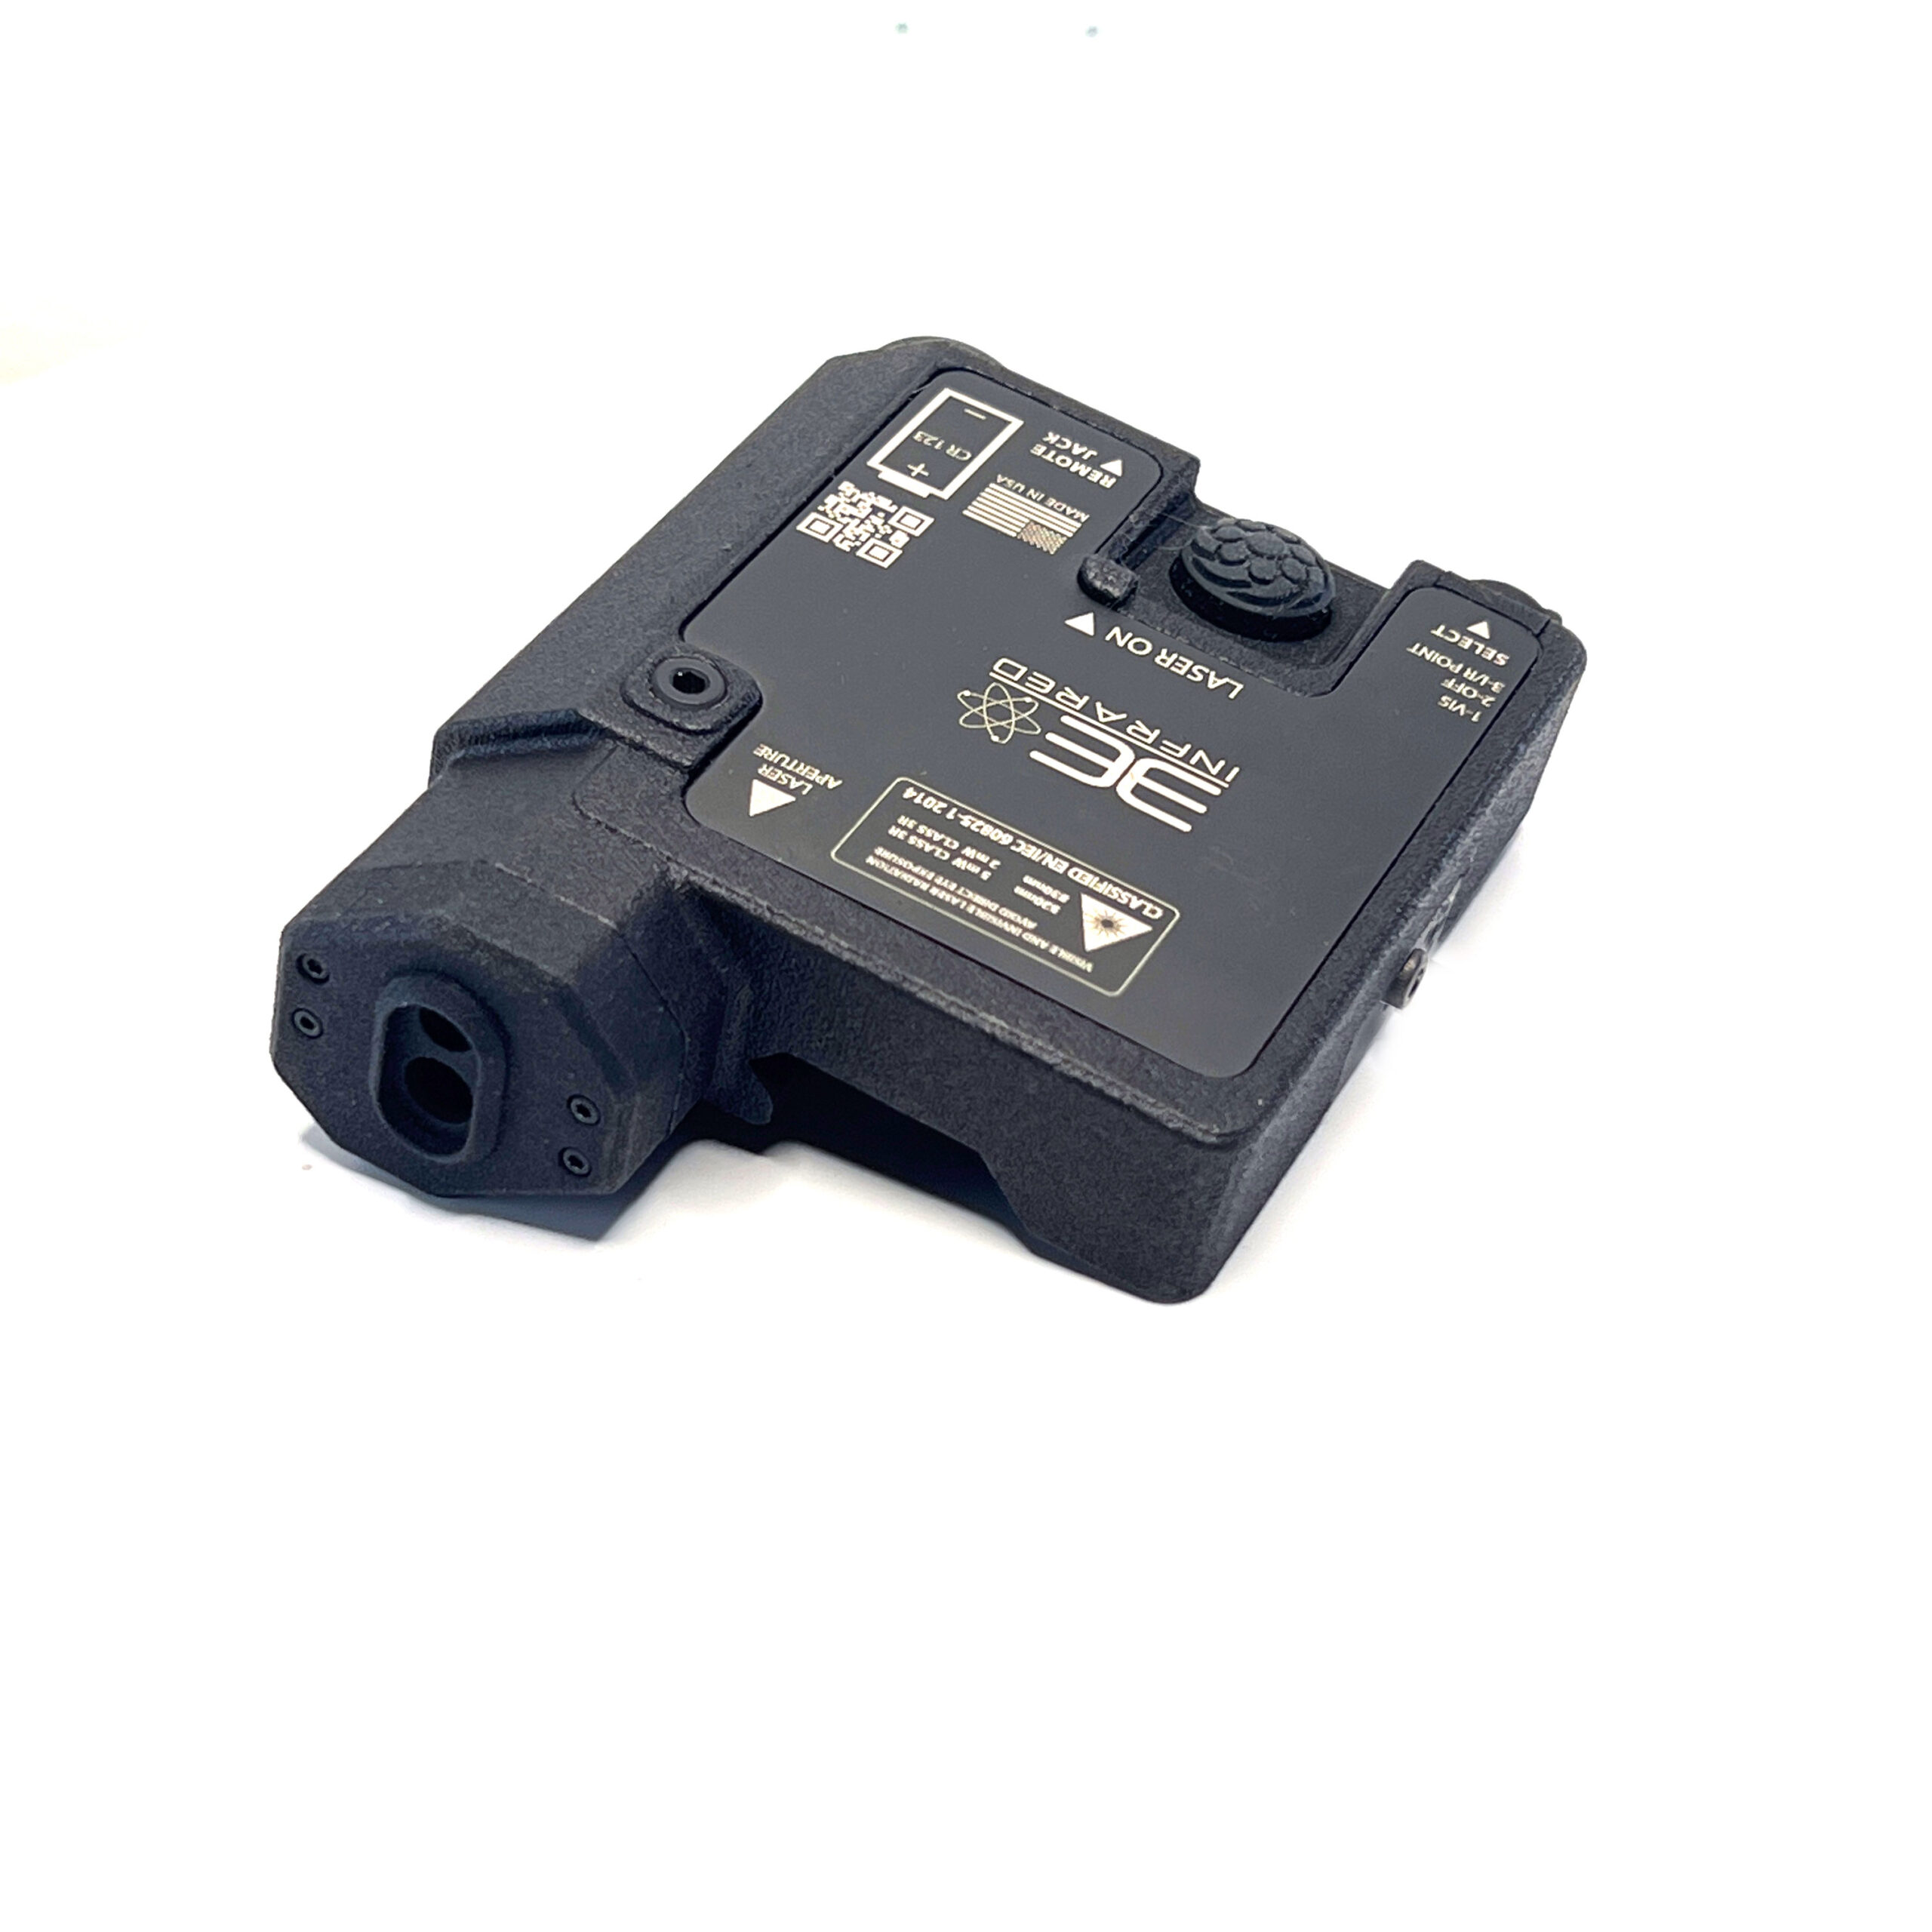 DIR-ONE Infrared Laser Aiming Device